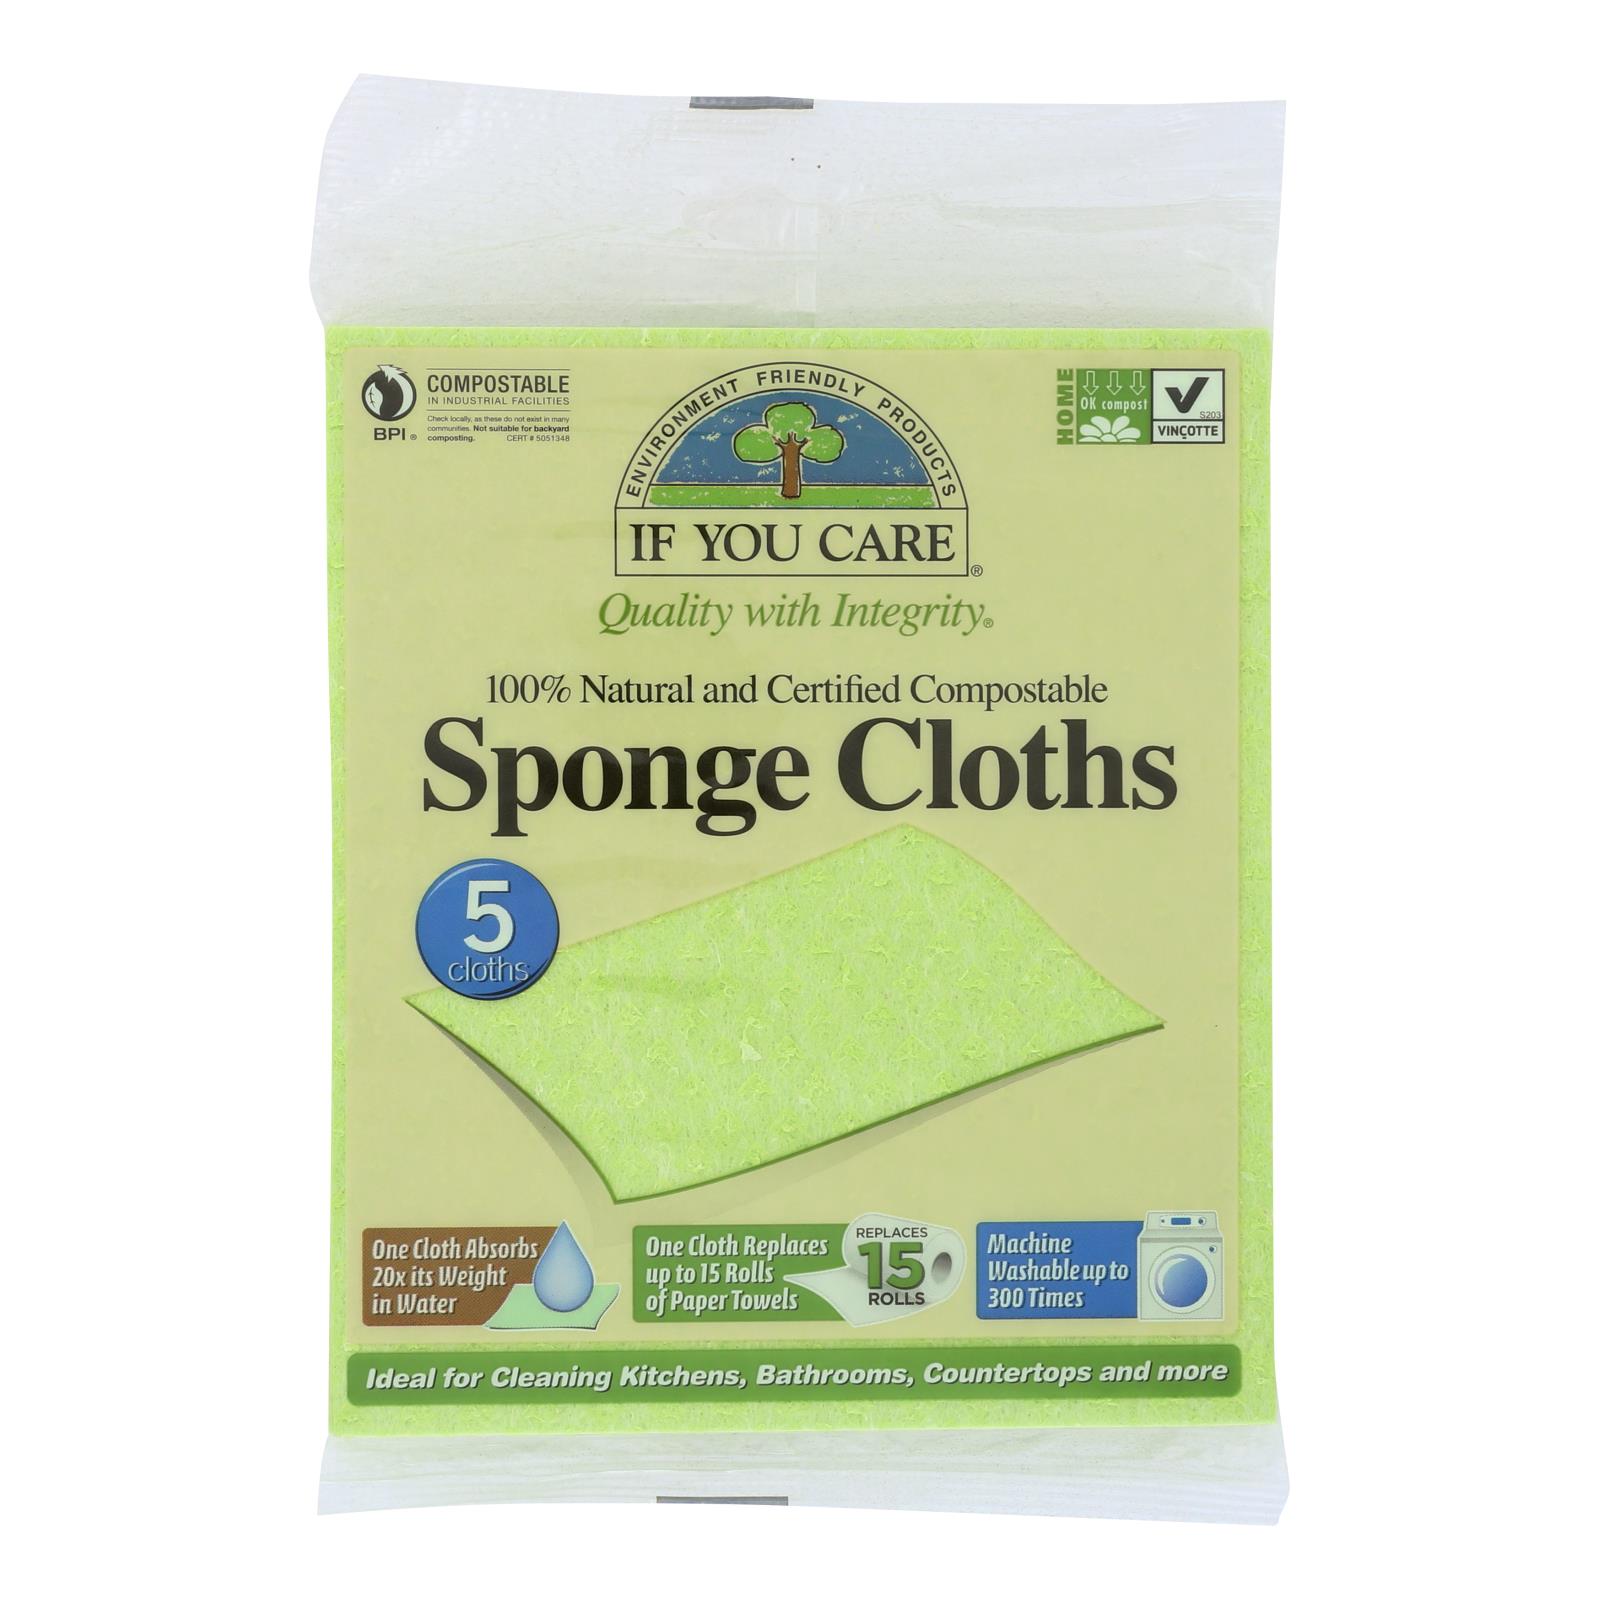 If You Care Sponge Cloth - 1 Each - 5 CT